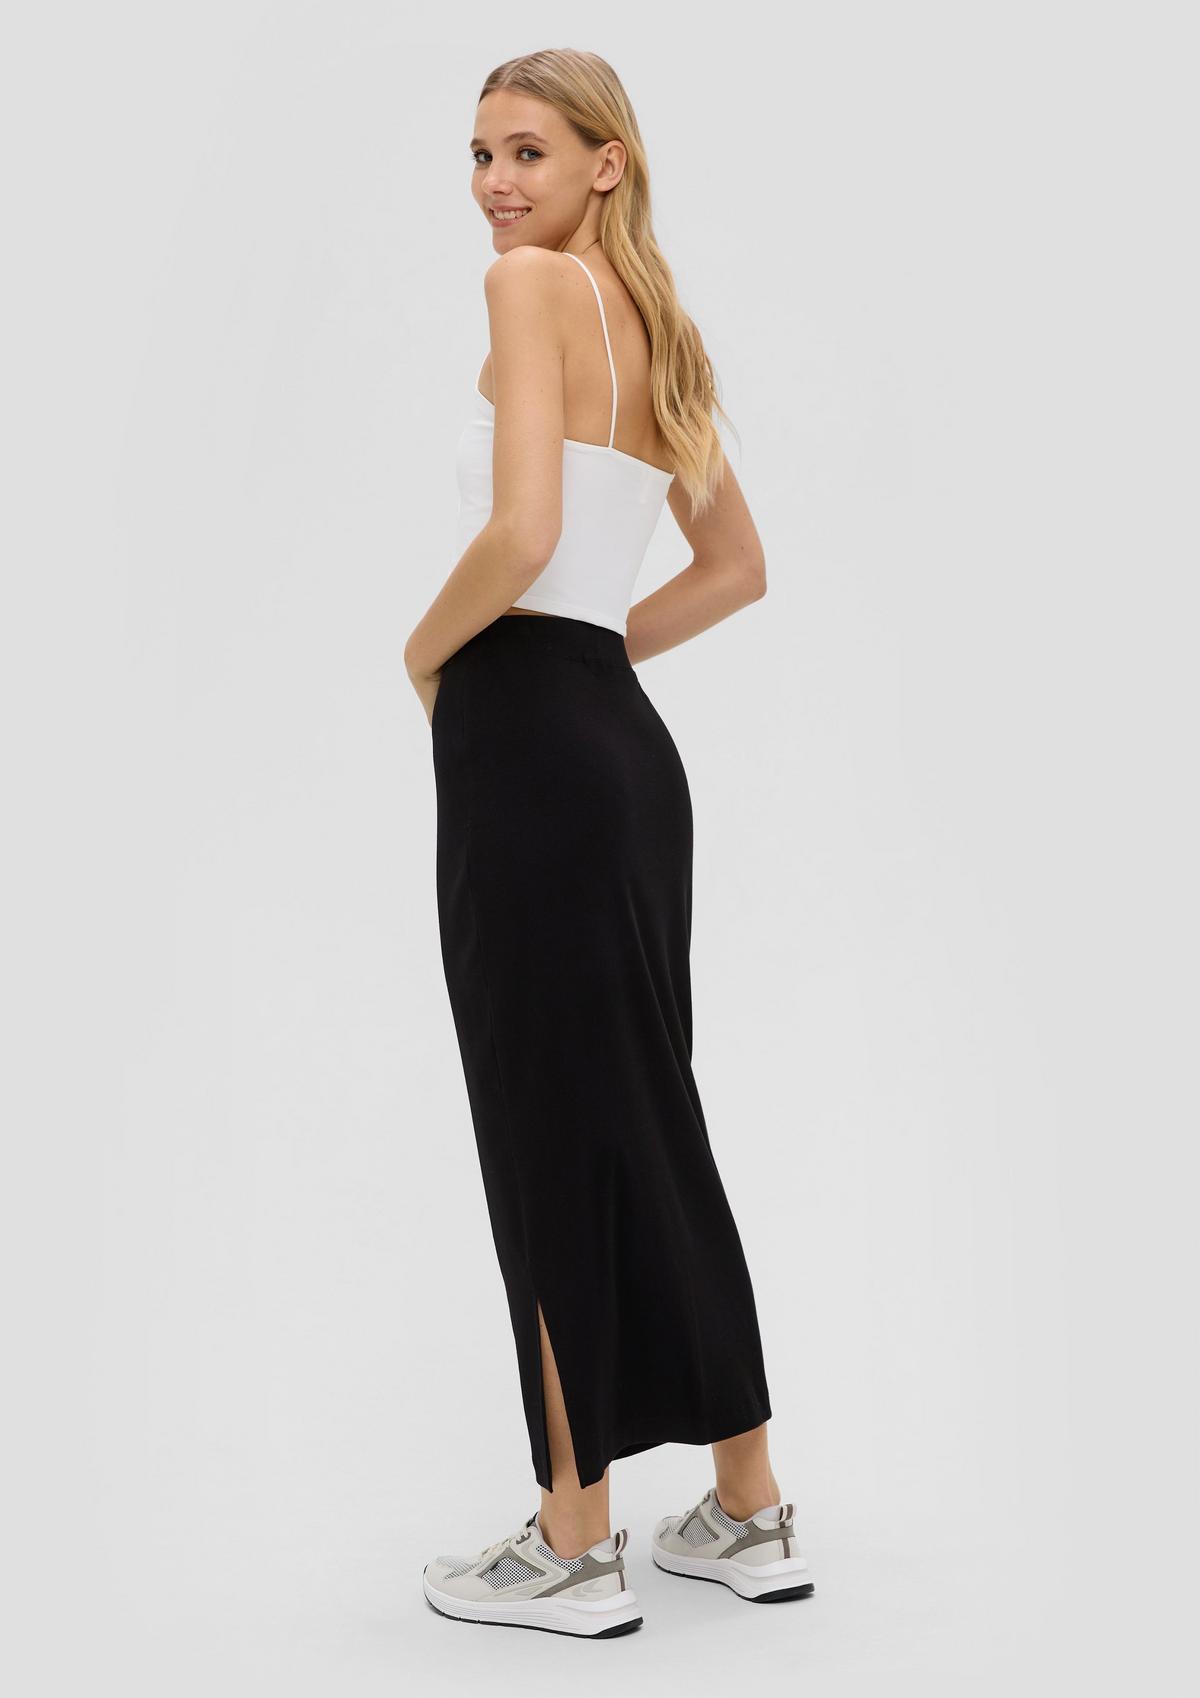 s.Oliver Maxi skirt with a ribbed texture